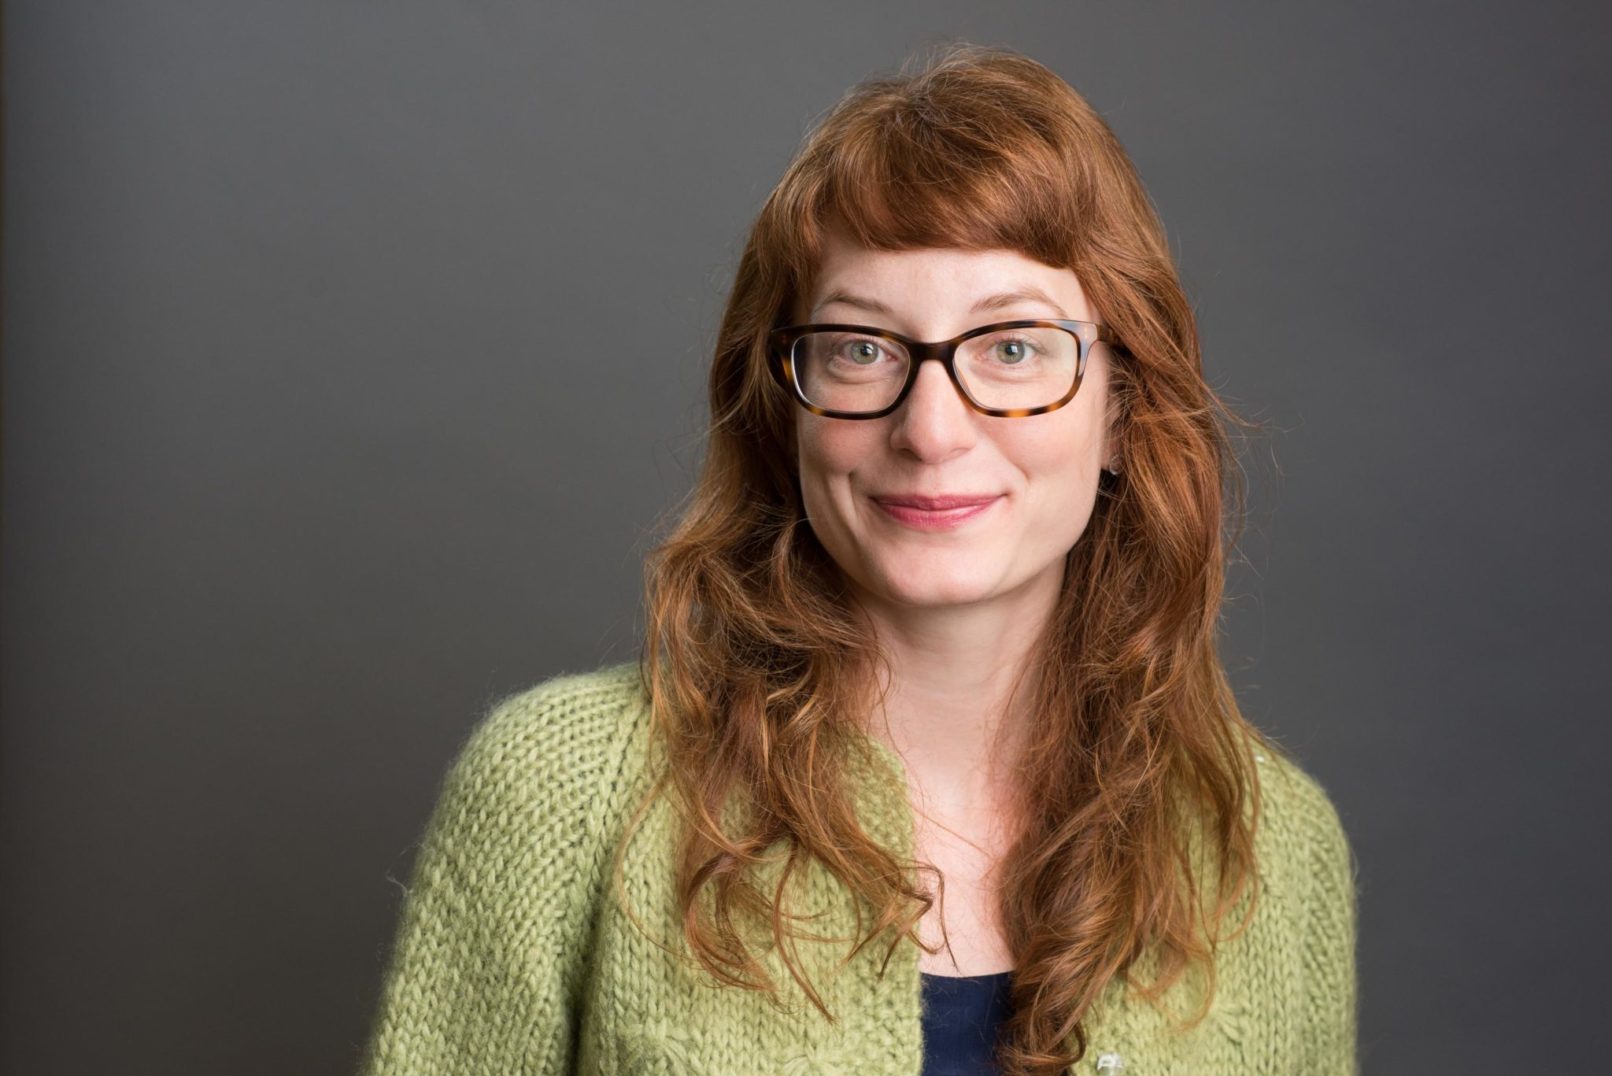 business headshot of a senior female landscape architect with glasses and green sweater.